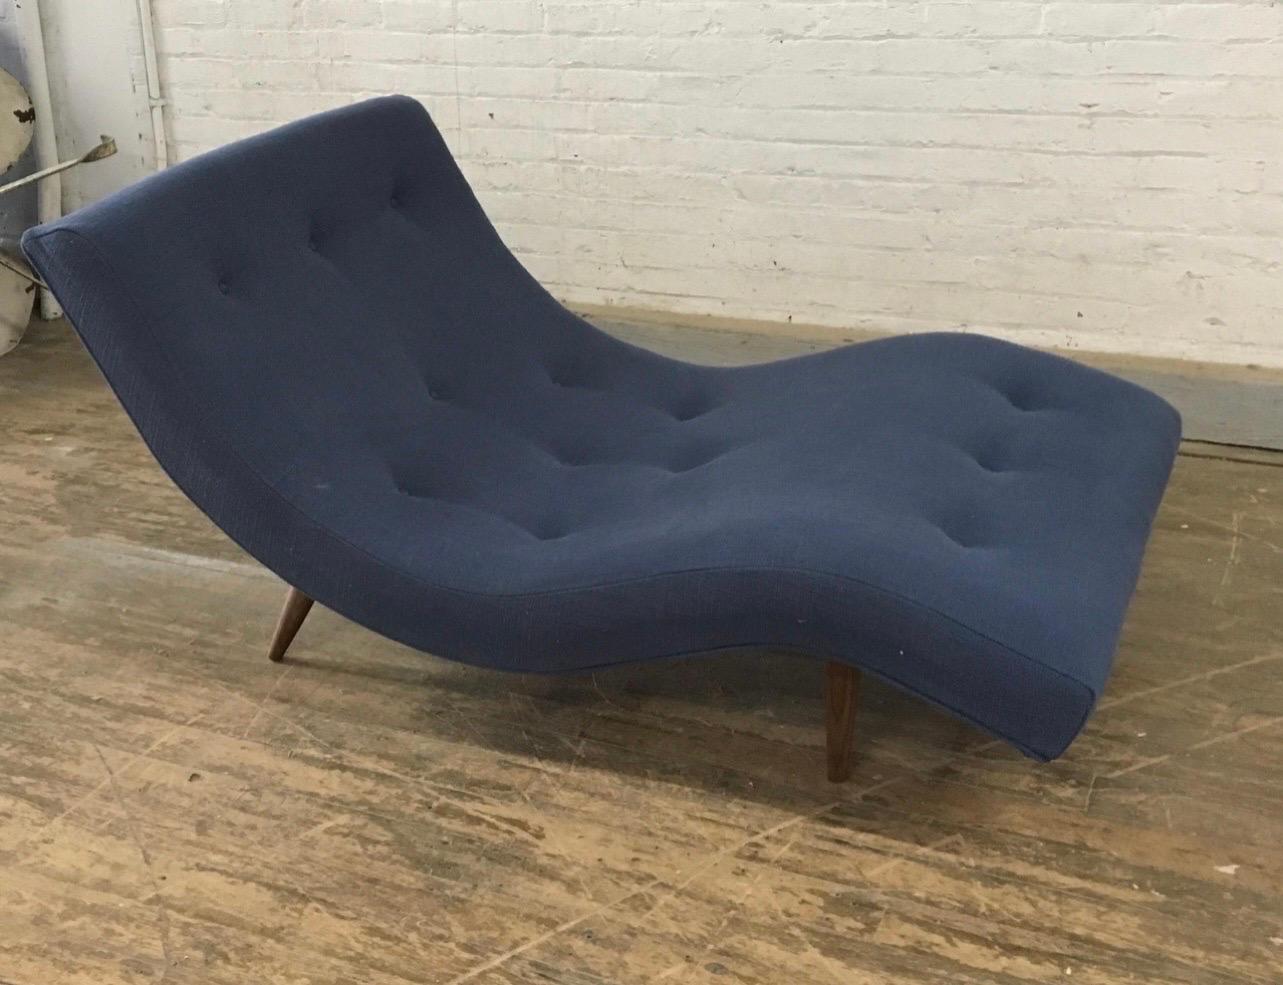 This vintage Adrian Pearsall chaise lounge has been expertly restored and reupholstered. The curved design of the chaise offers ultimate comfort and relaxation, while the sturdy wooden frame provides stability and support. This piece is a true